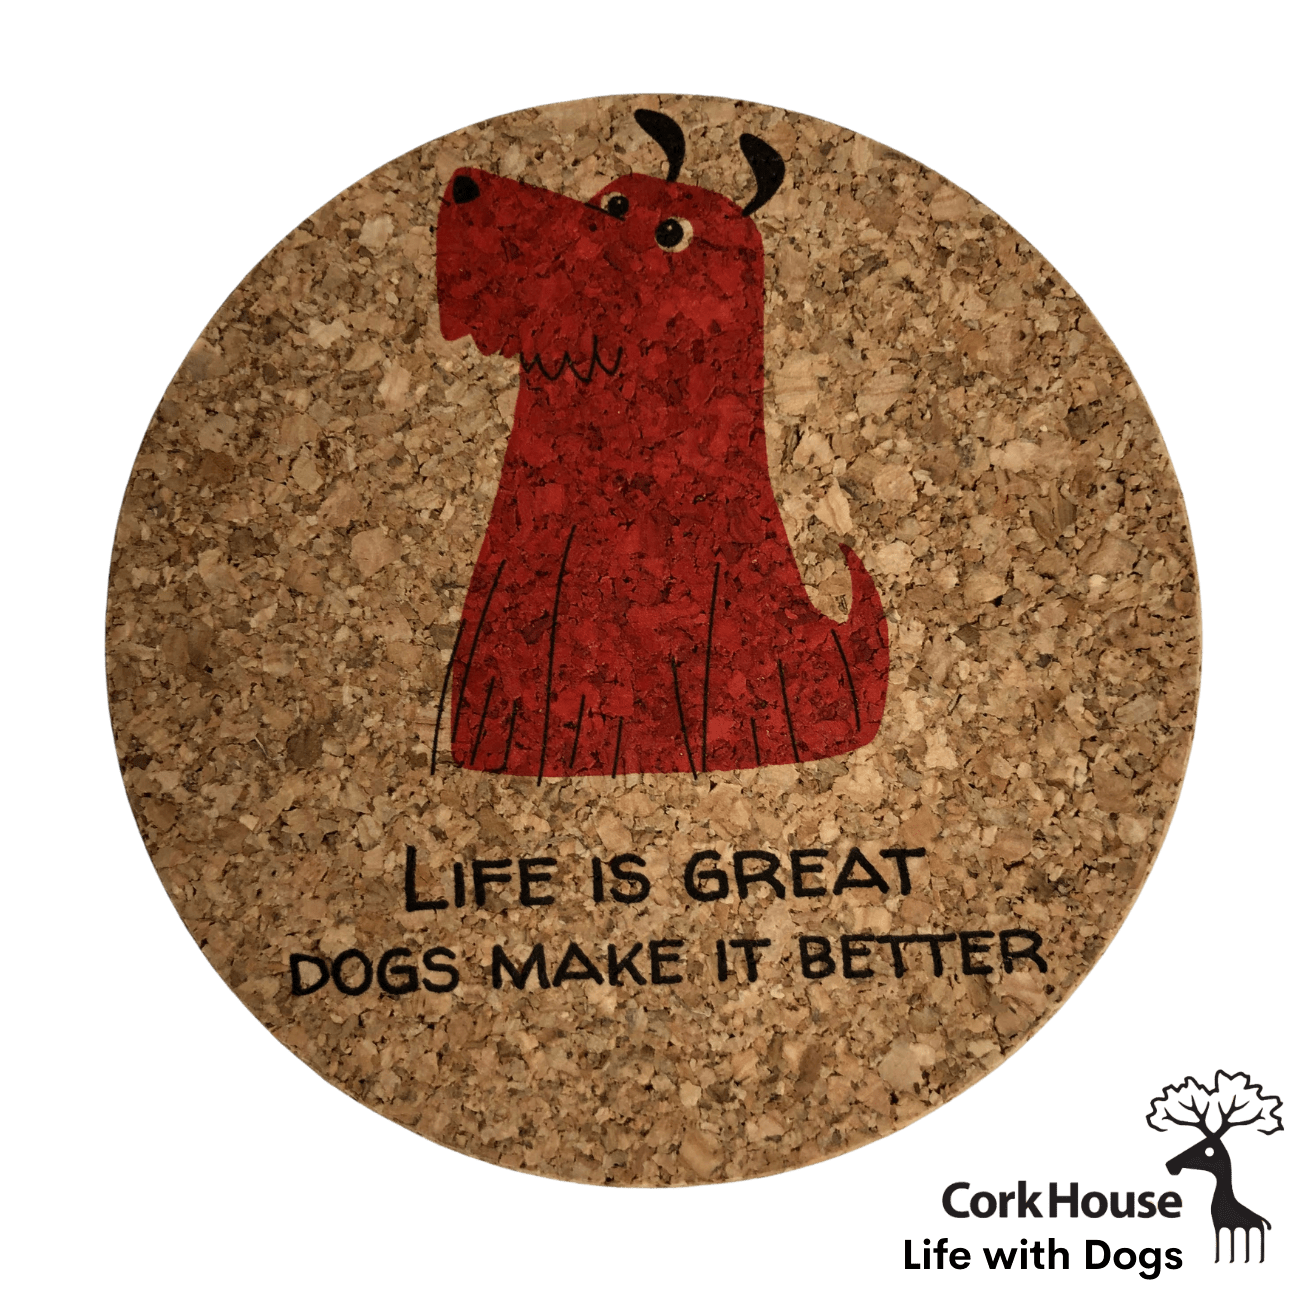 CorkHouse Life with Dogs Set of 6 Printed Coasters - Various Patterns